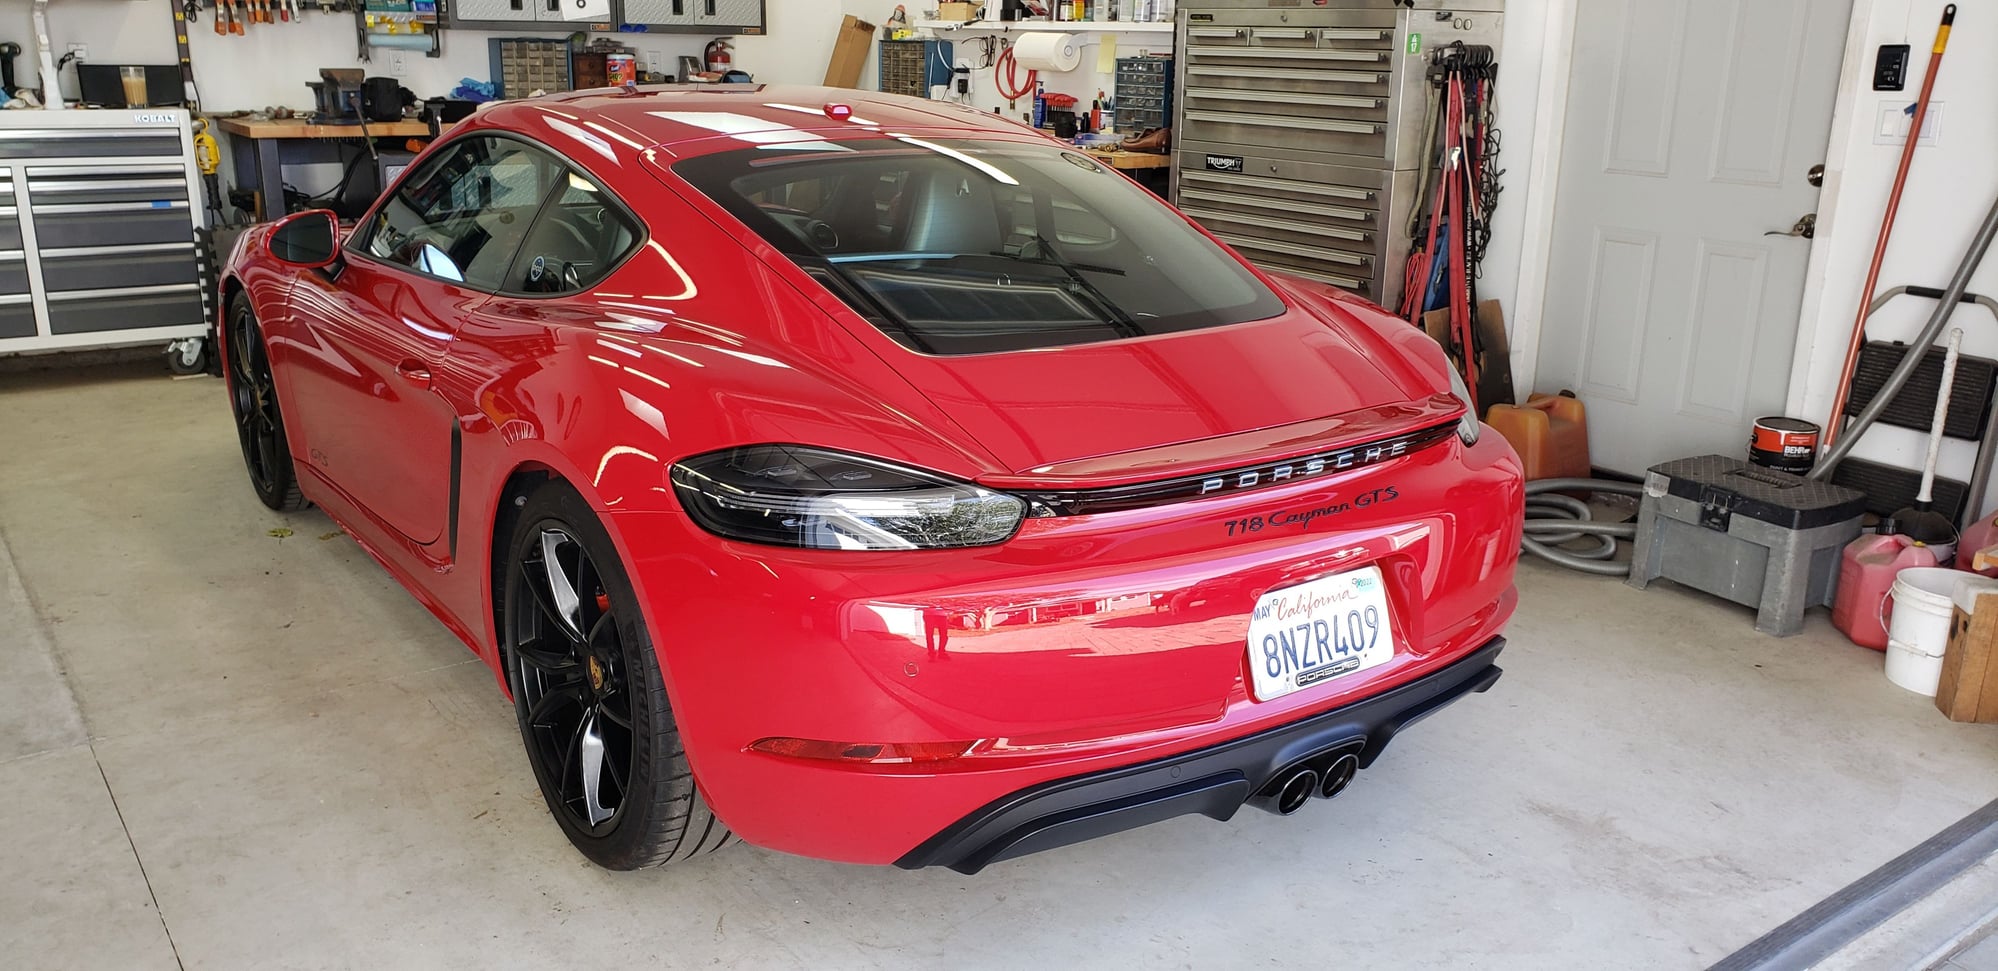 2018 Porsche 718 Cayman - 2018 Cayman GTS, CPO, 6sp manual, Carmine Red $83,500 - Used - VIN WP0AB2A85JK279742 - 3,965 Miles - 4 cyl - 2WD - Manual - Coupe - Red - San Diego, CA 92008, United States